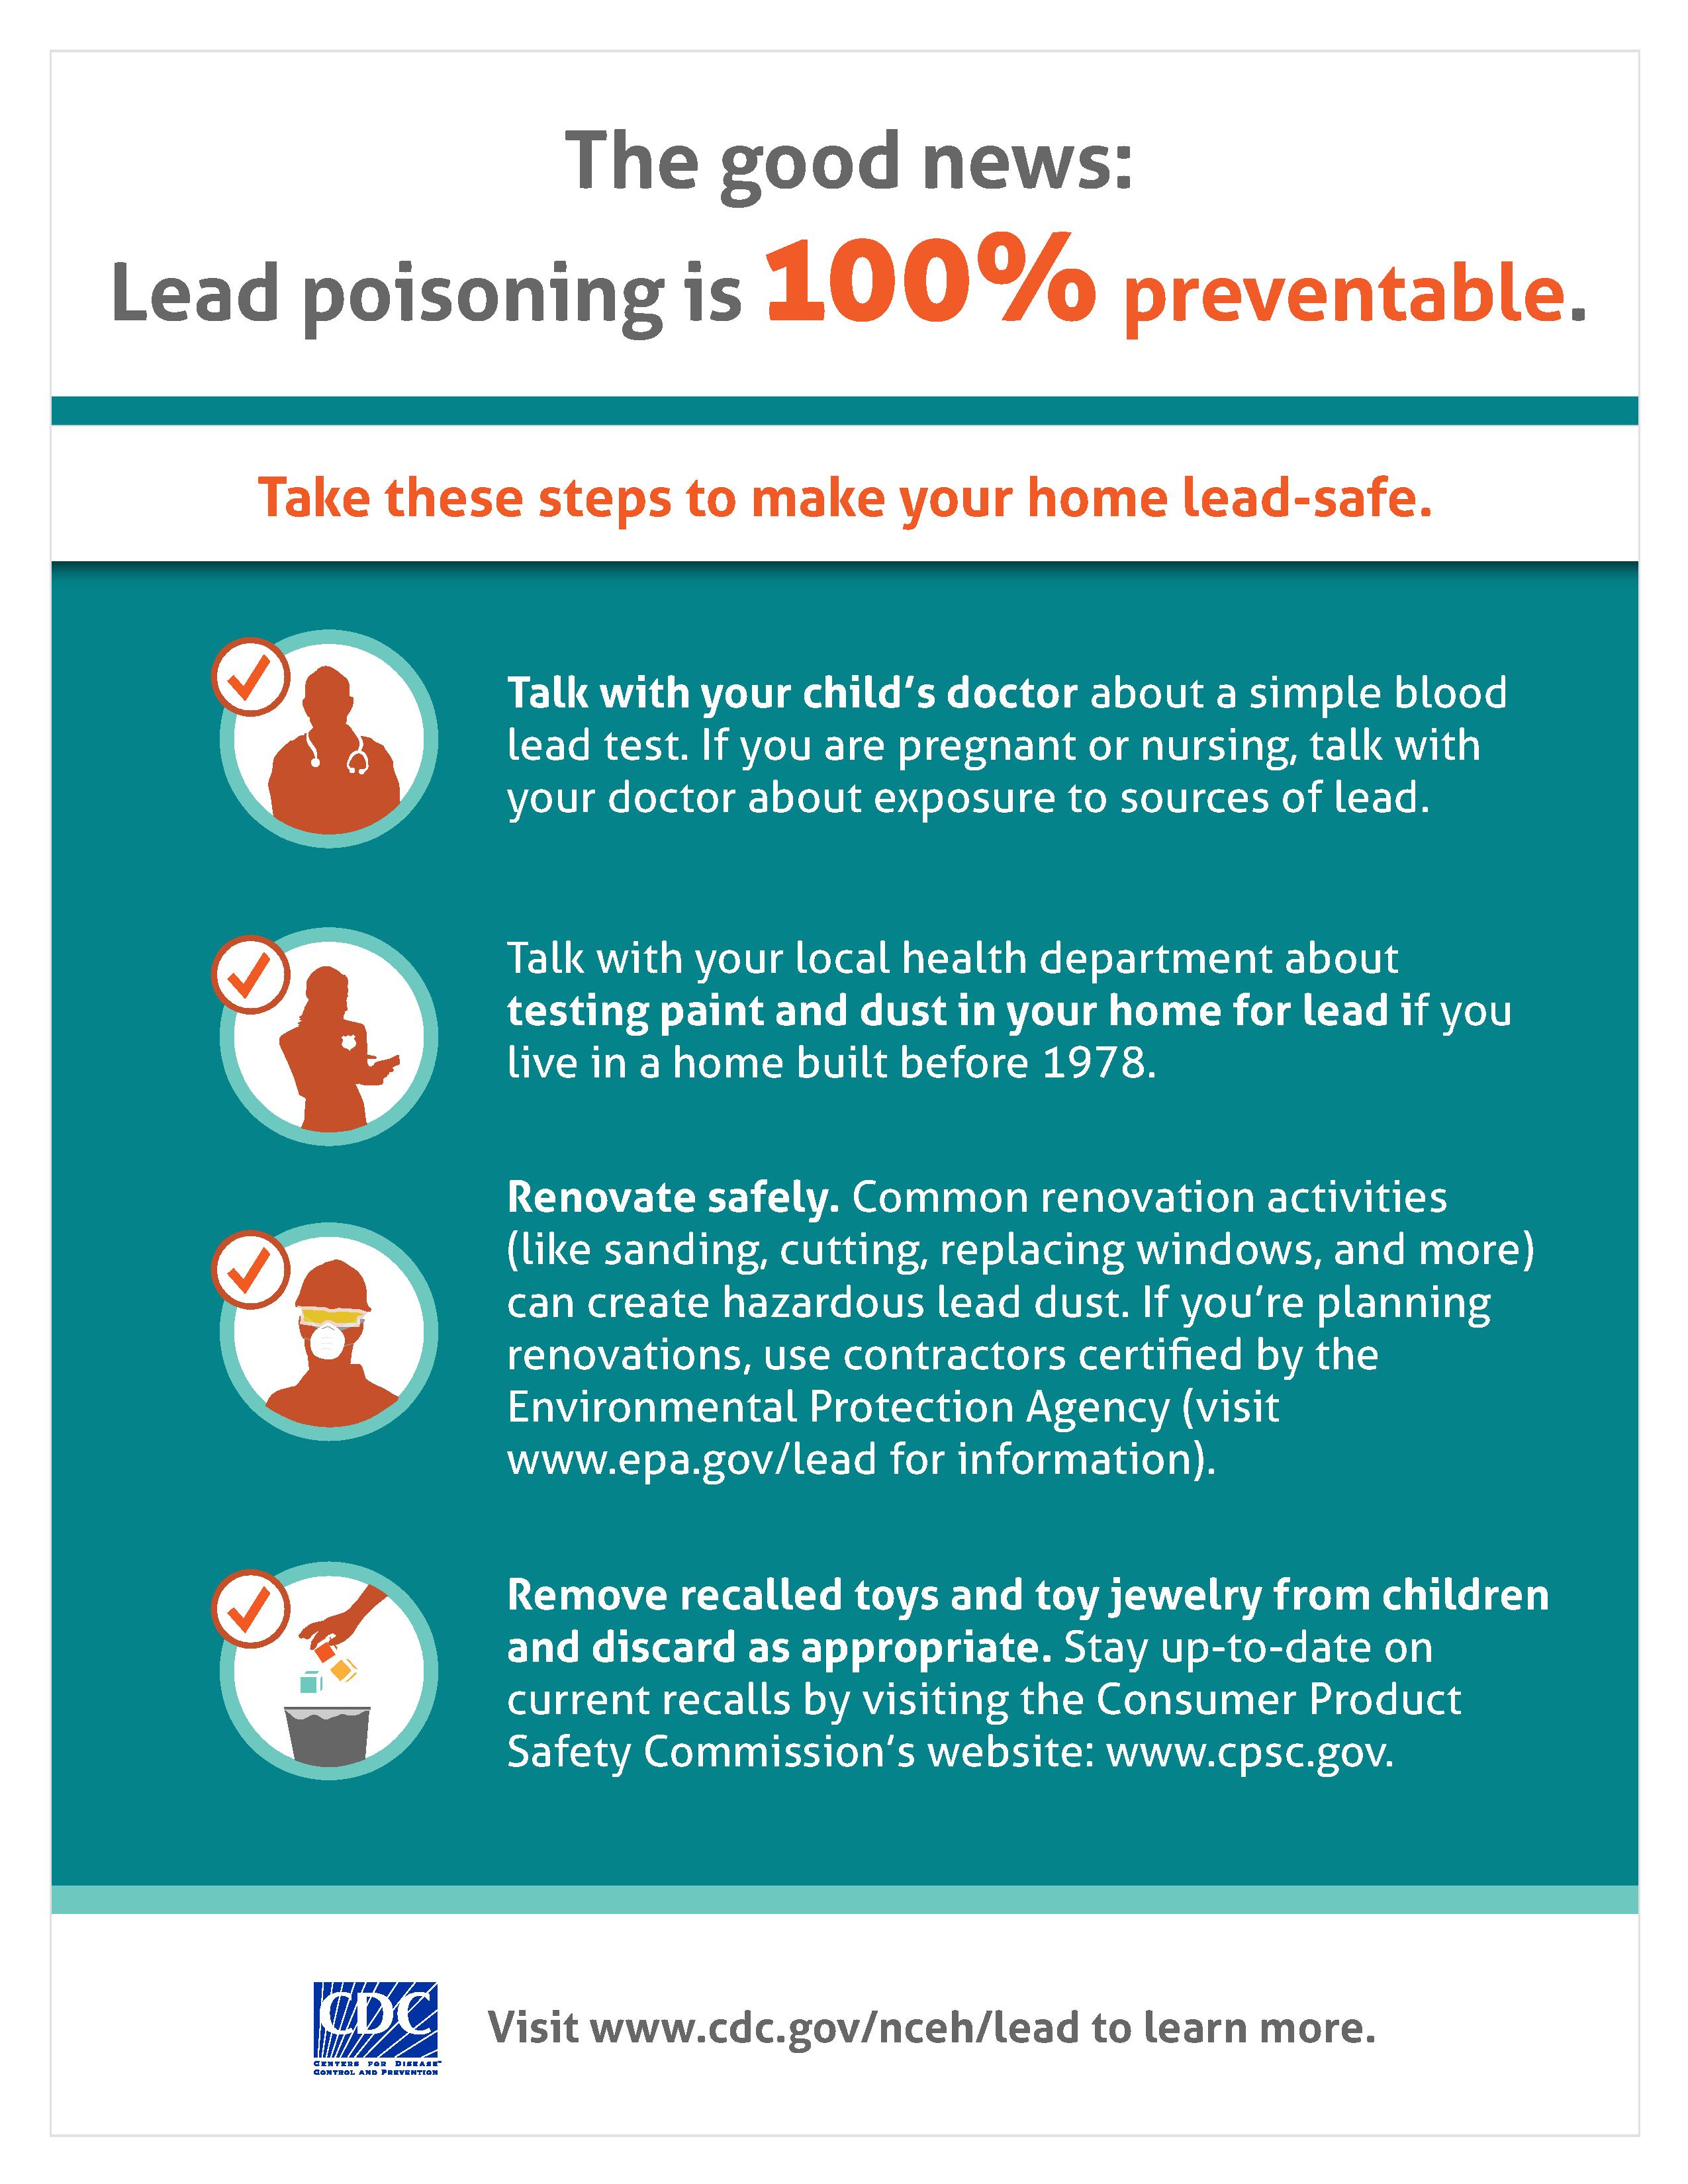 Lead Poisoning is Preventable